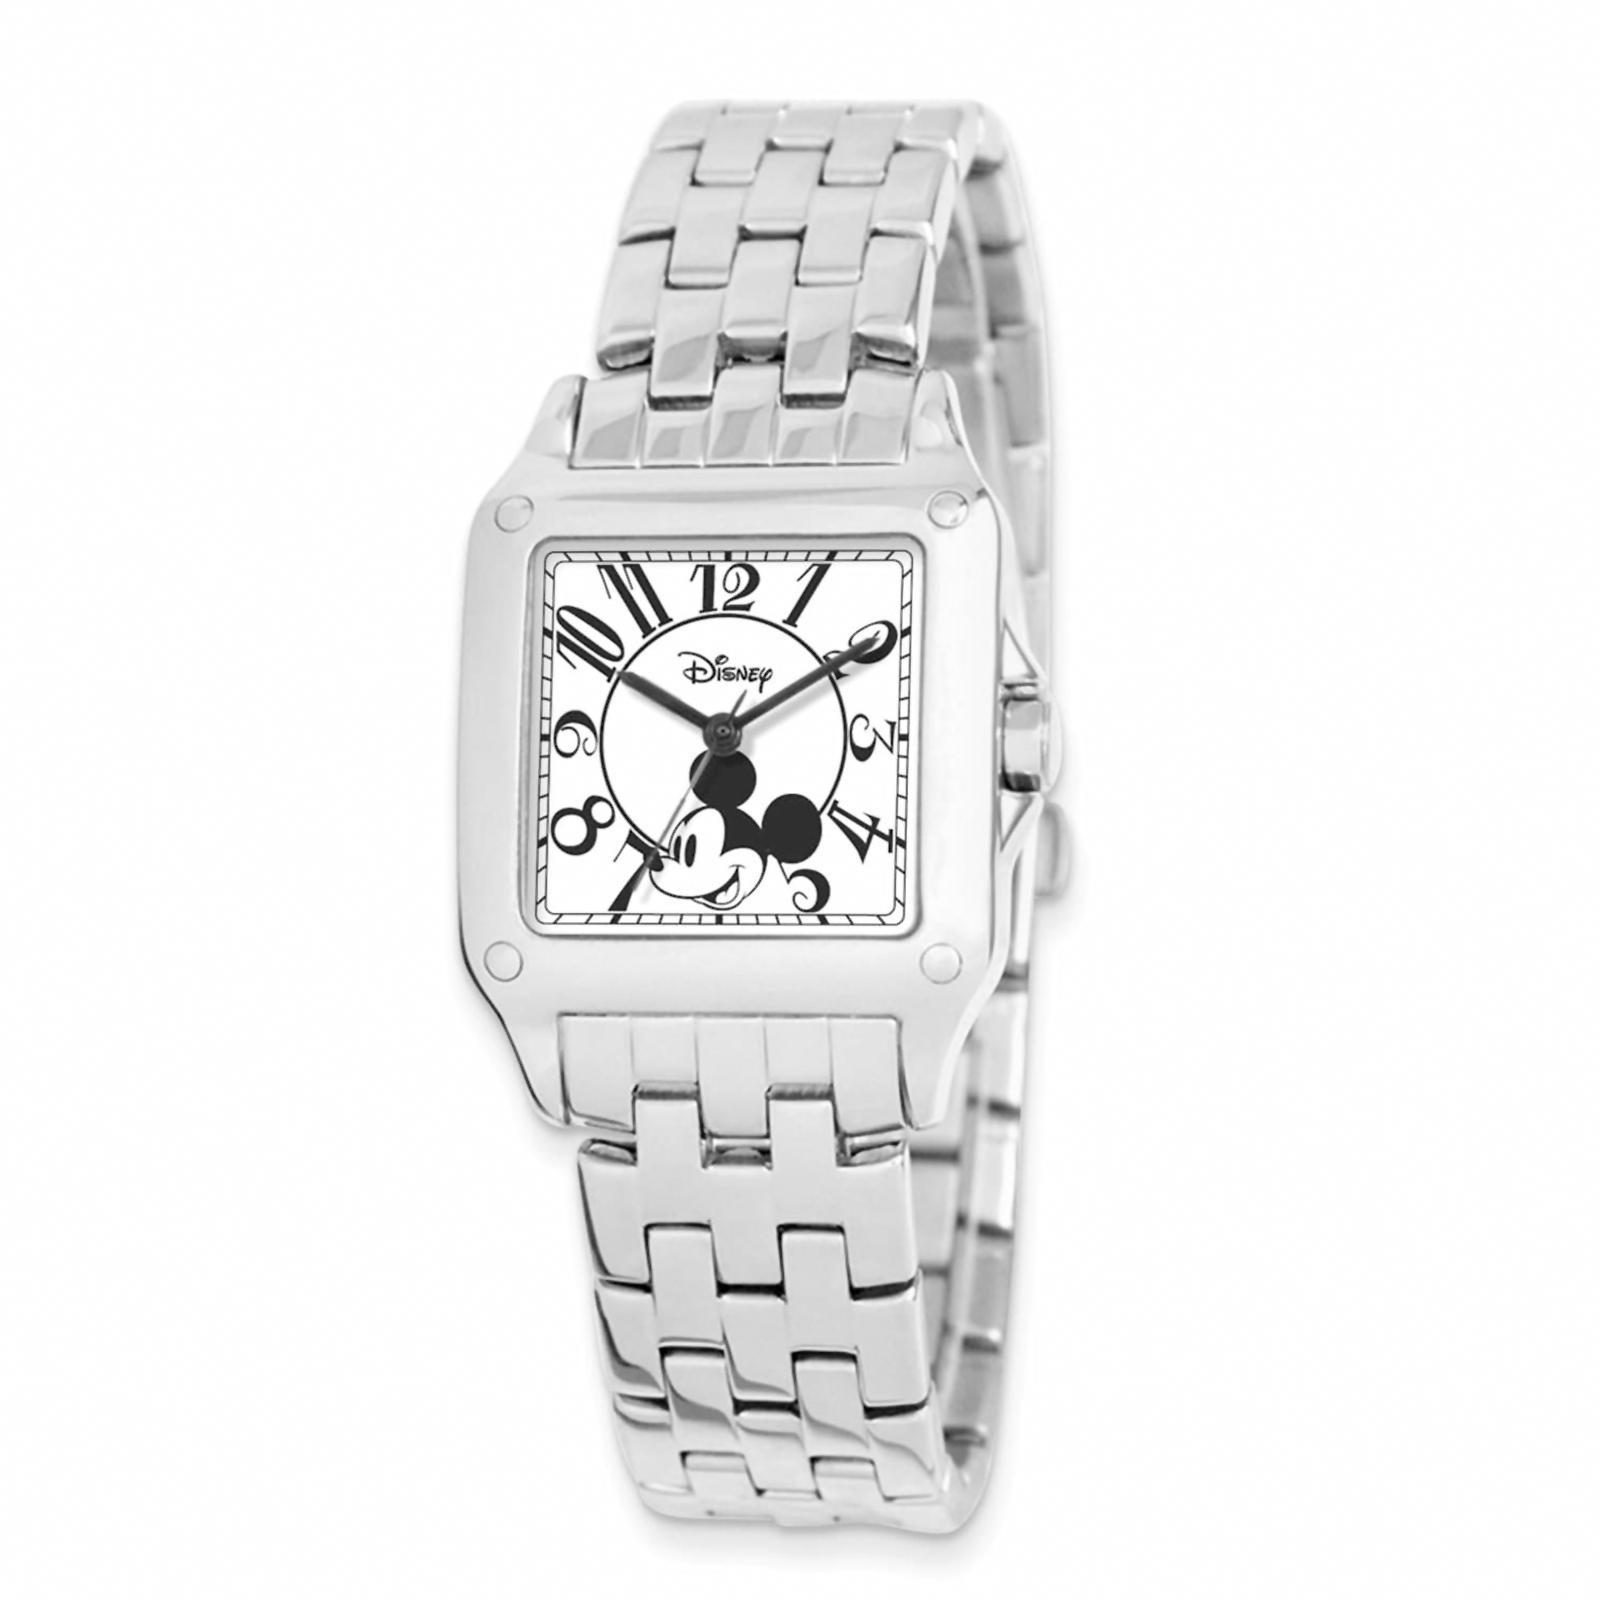 Disney XWA4393 Men's Stainless Steel Square Mickey Mouse Watch - Silver